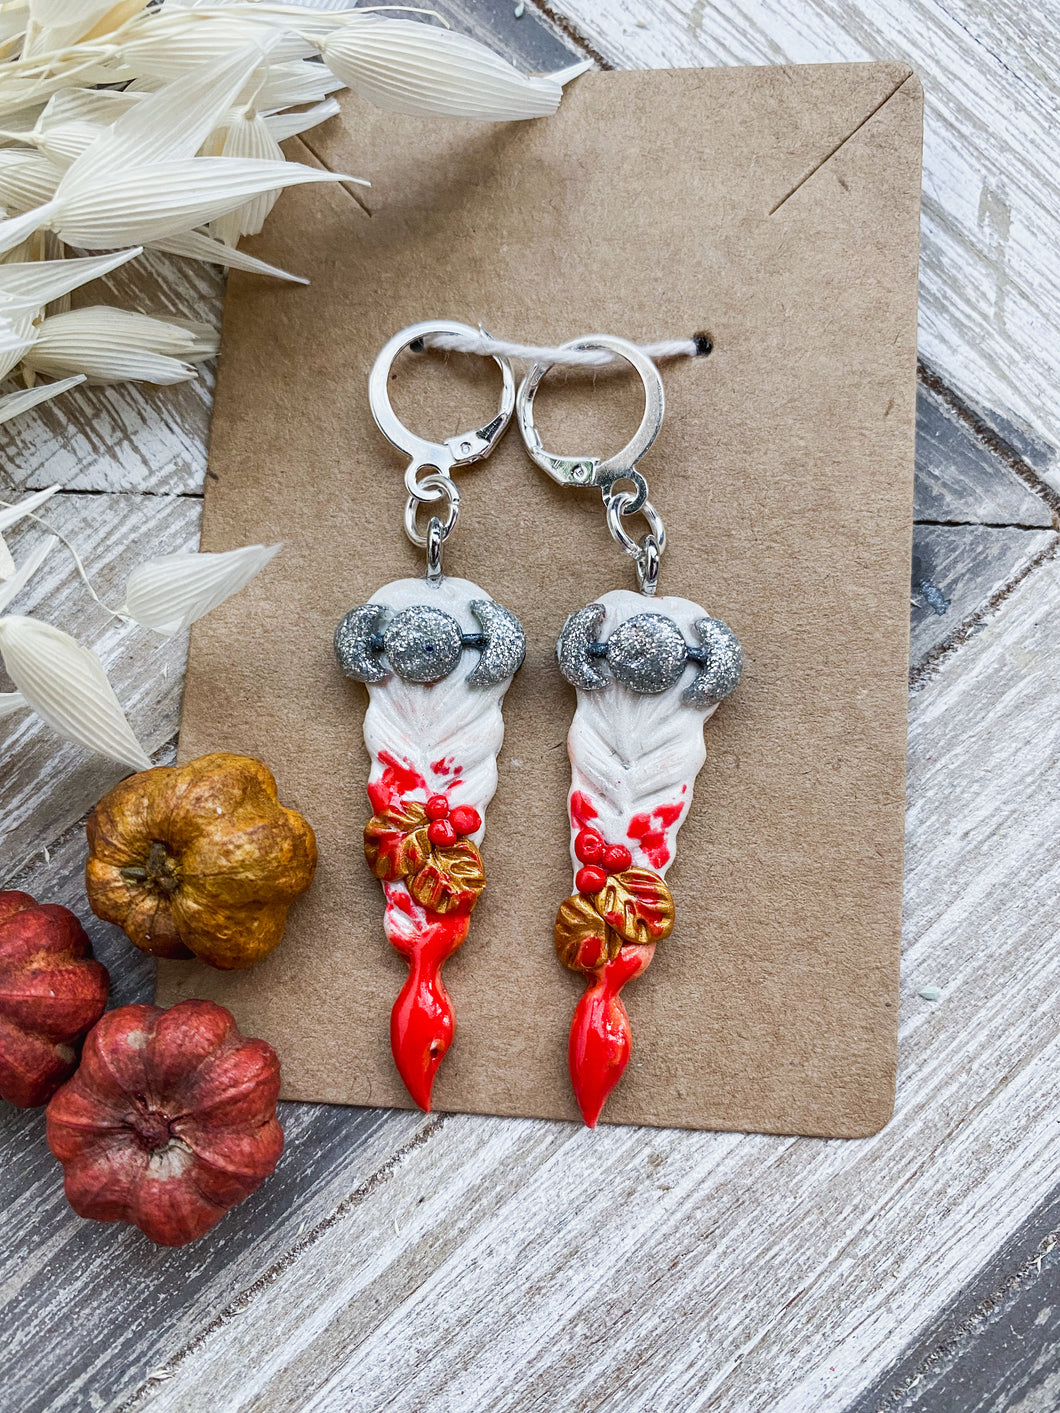 Braided Earrings | Manon | Polymer Clay Jewelry